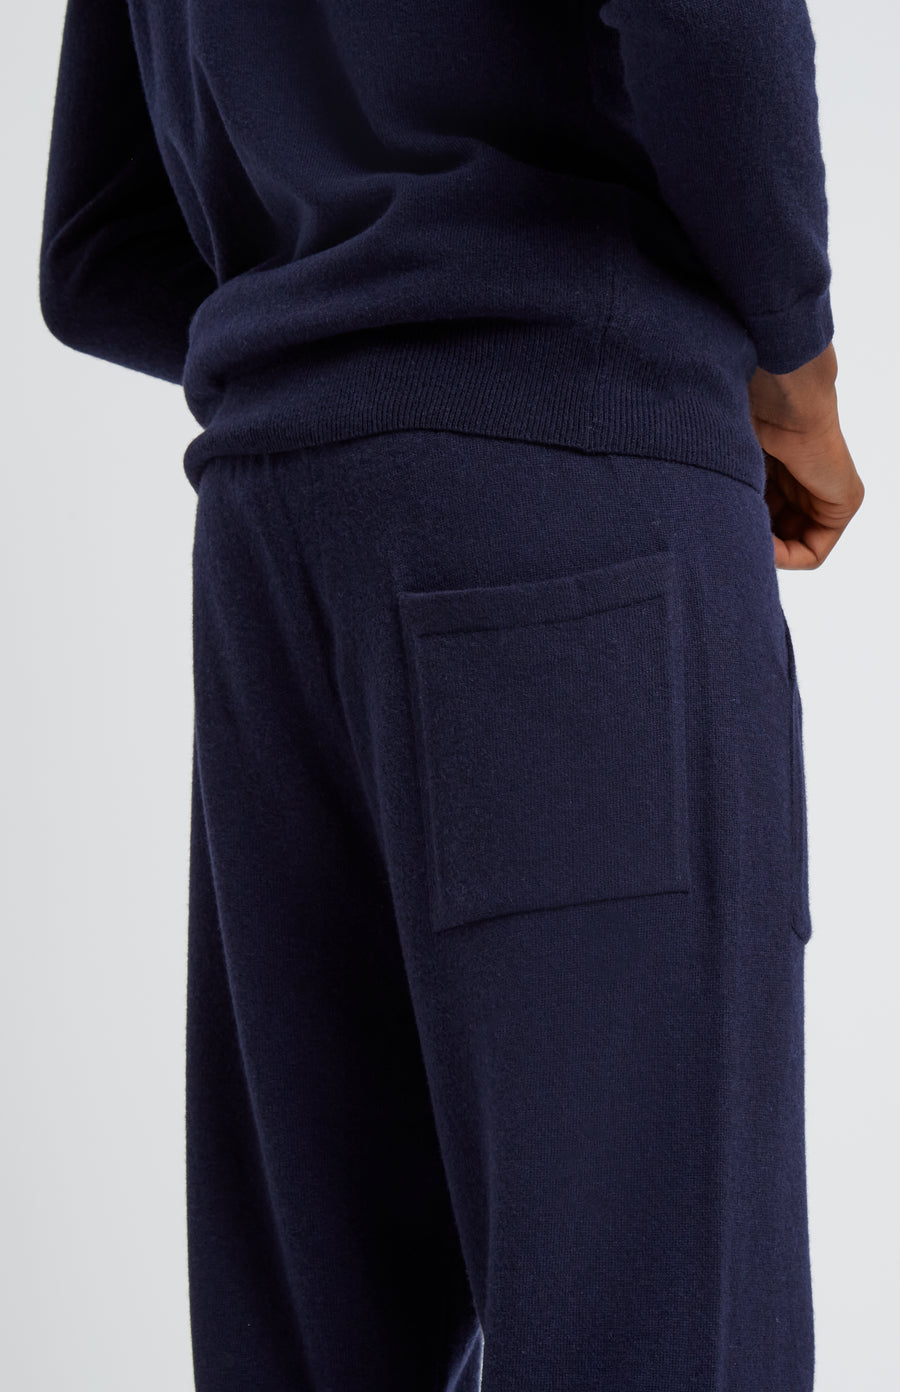 Pringle of Scotland Men's Knitted Merino Cashmere Joggers In Navy rear view